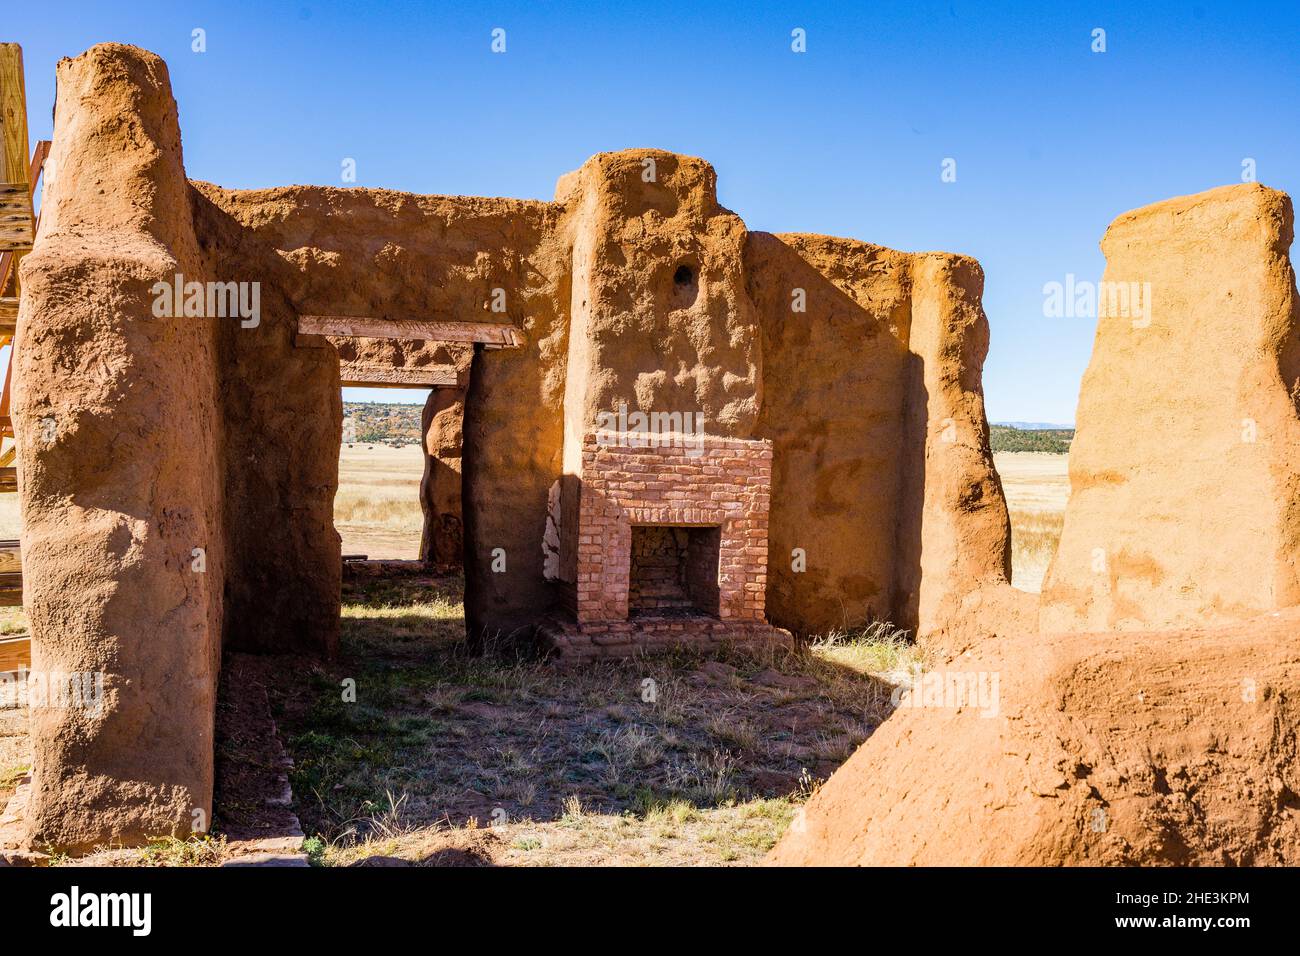 Remains of adobe walls and fireplace in living quarter area at Fort Union National Monument. Evidence of a lonely and harsh life. Stock Photo